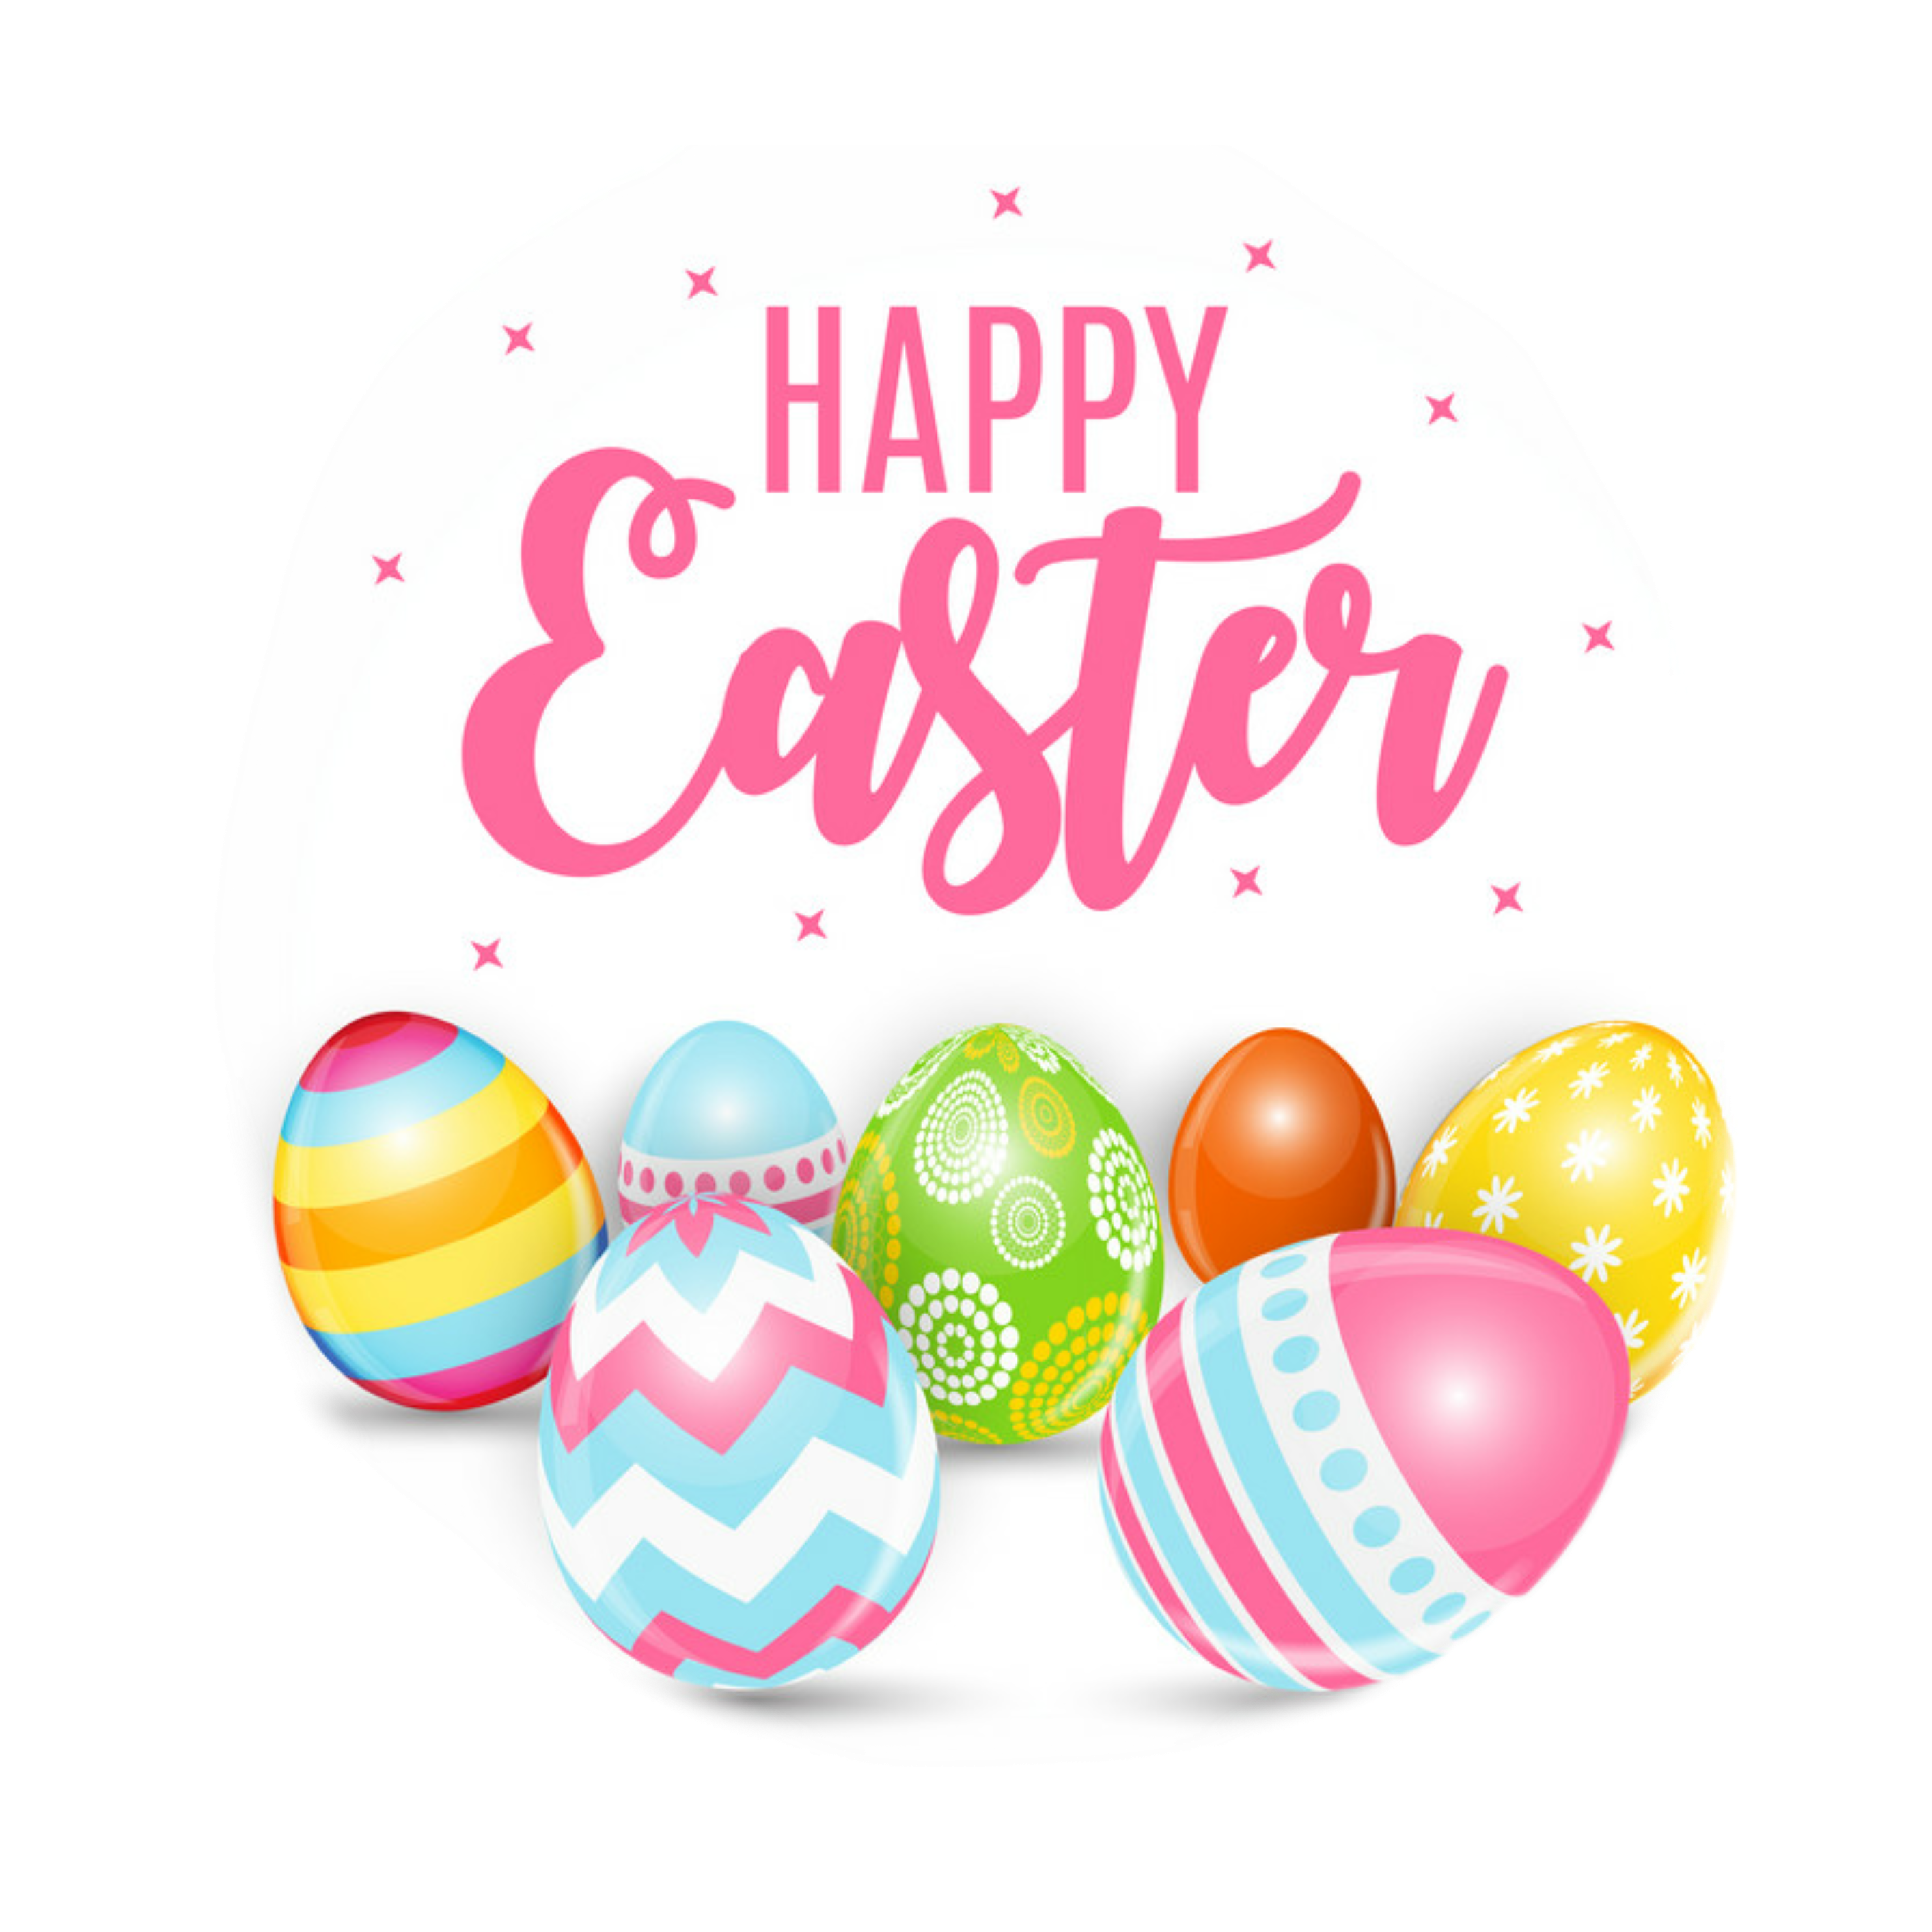 This visual is about happyeaster easterweekend easter2019 freetoedit #happy...